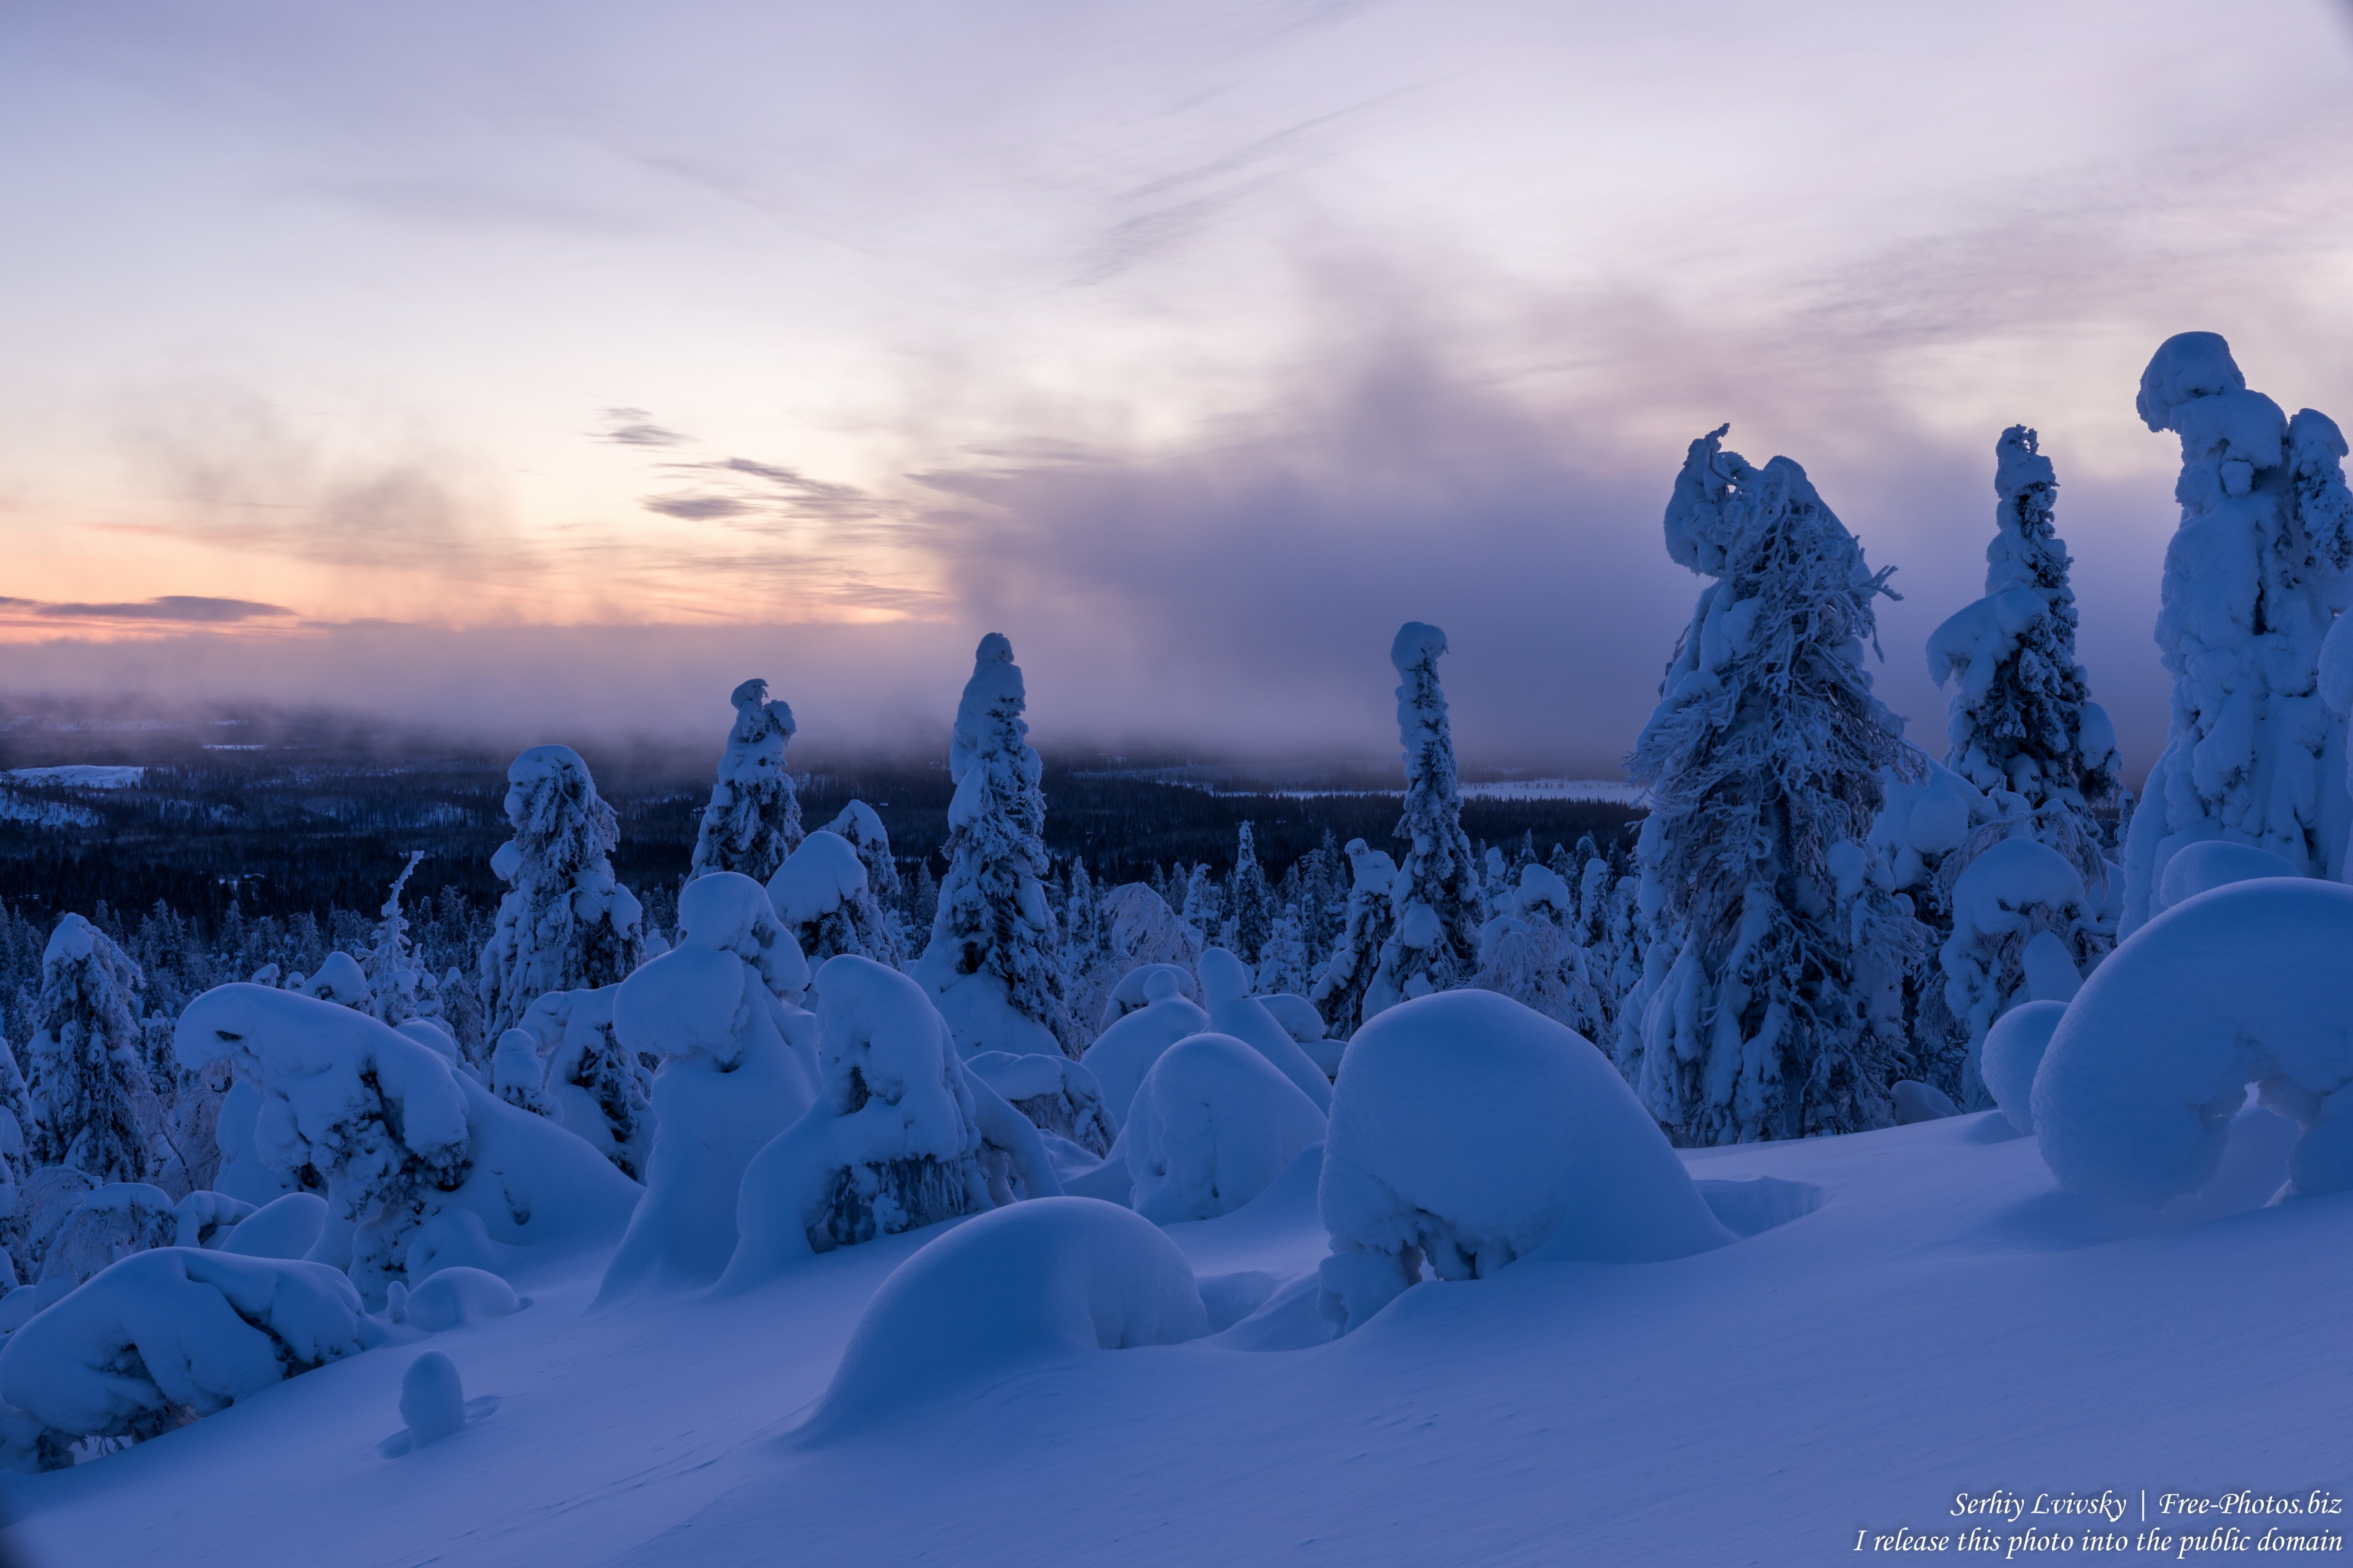 Valtavaara, Finland, photographed in January 2020 by Serhiy Lvivsky, picture 59